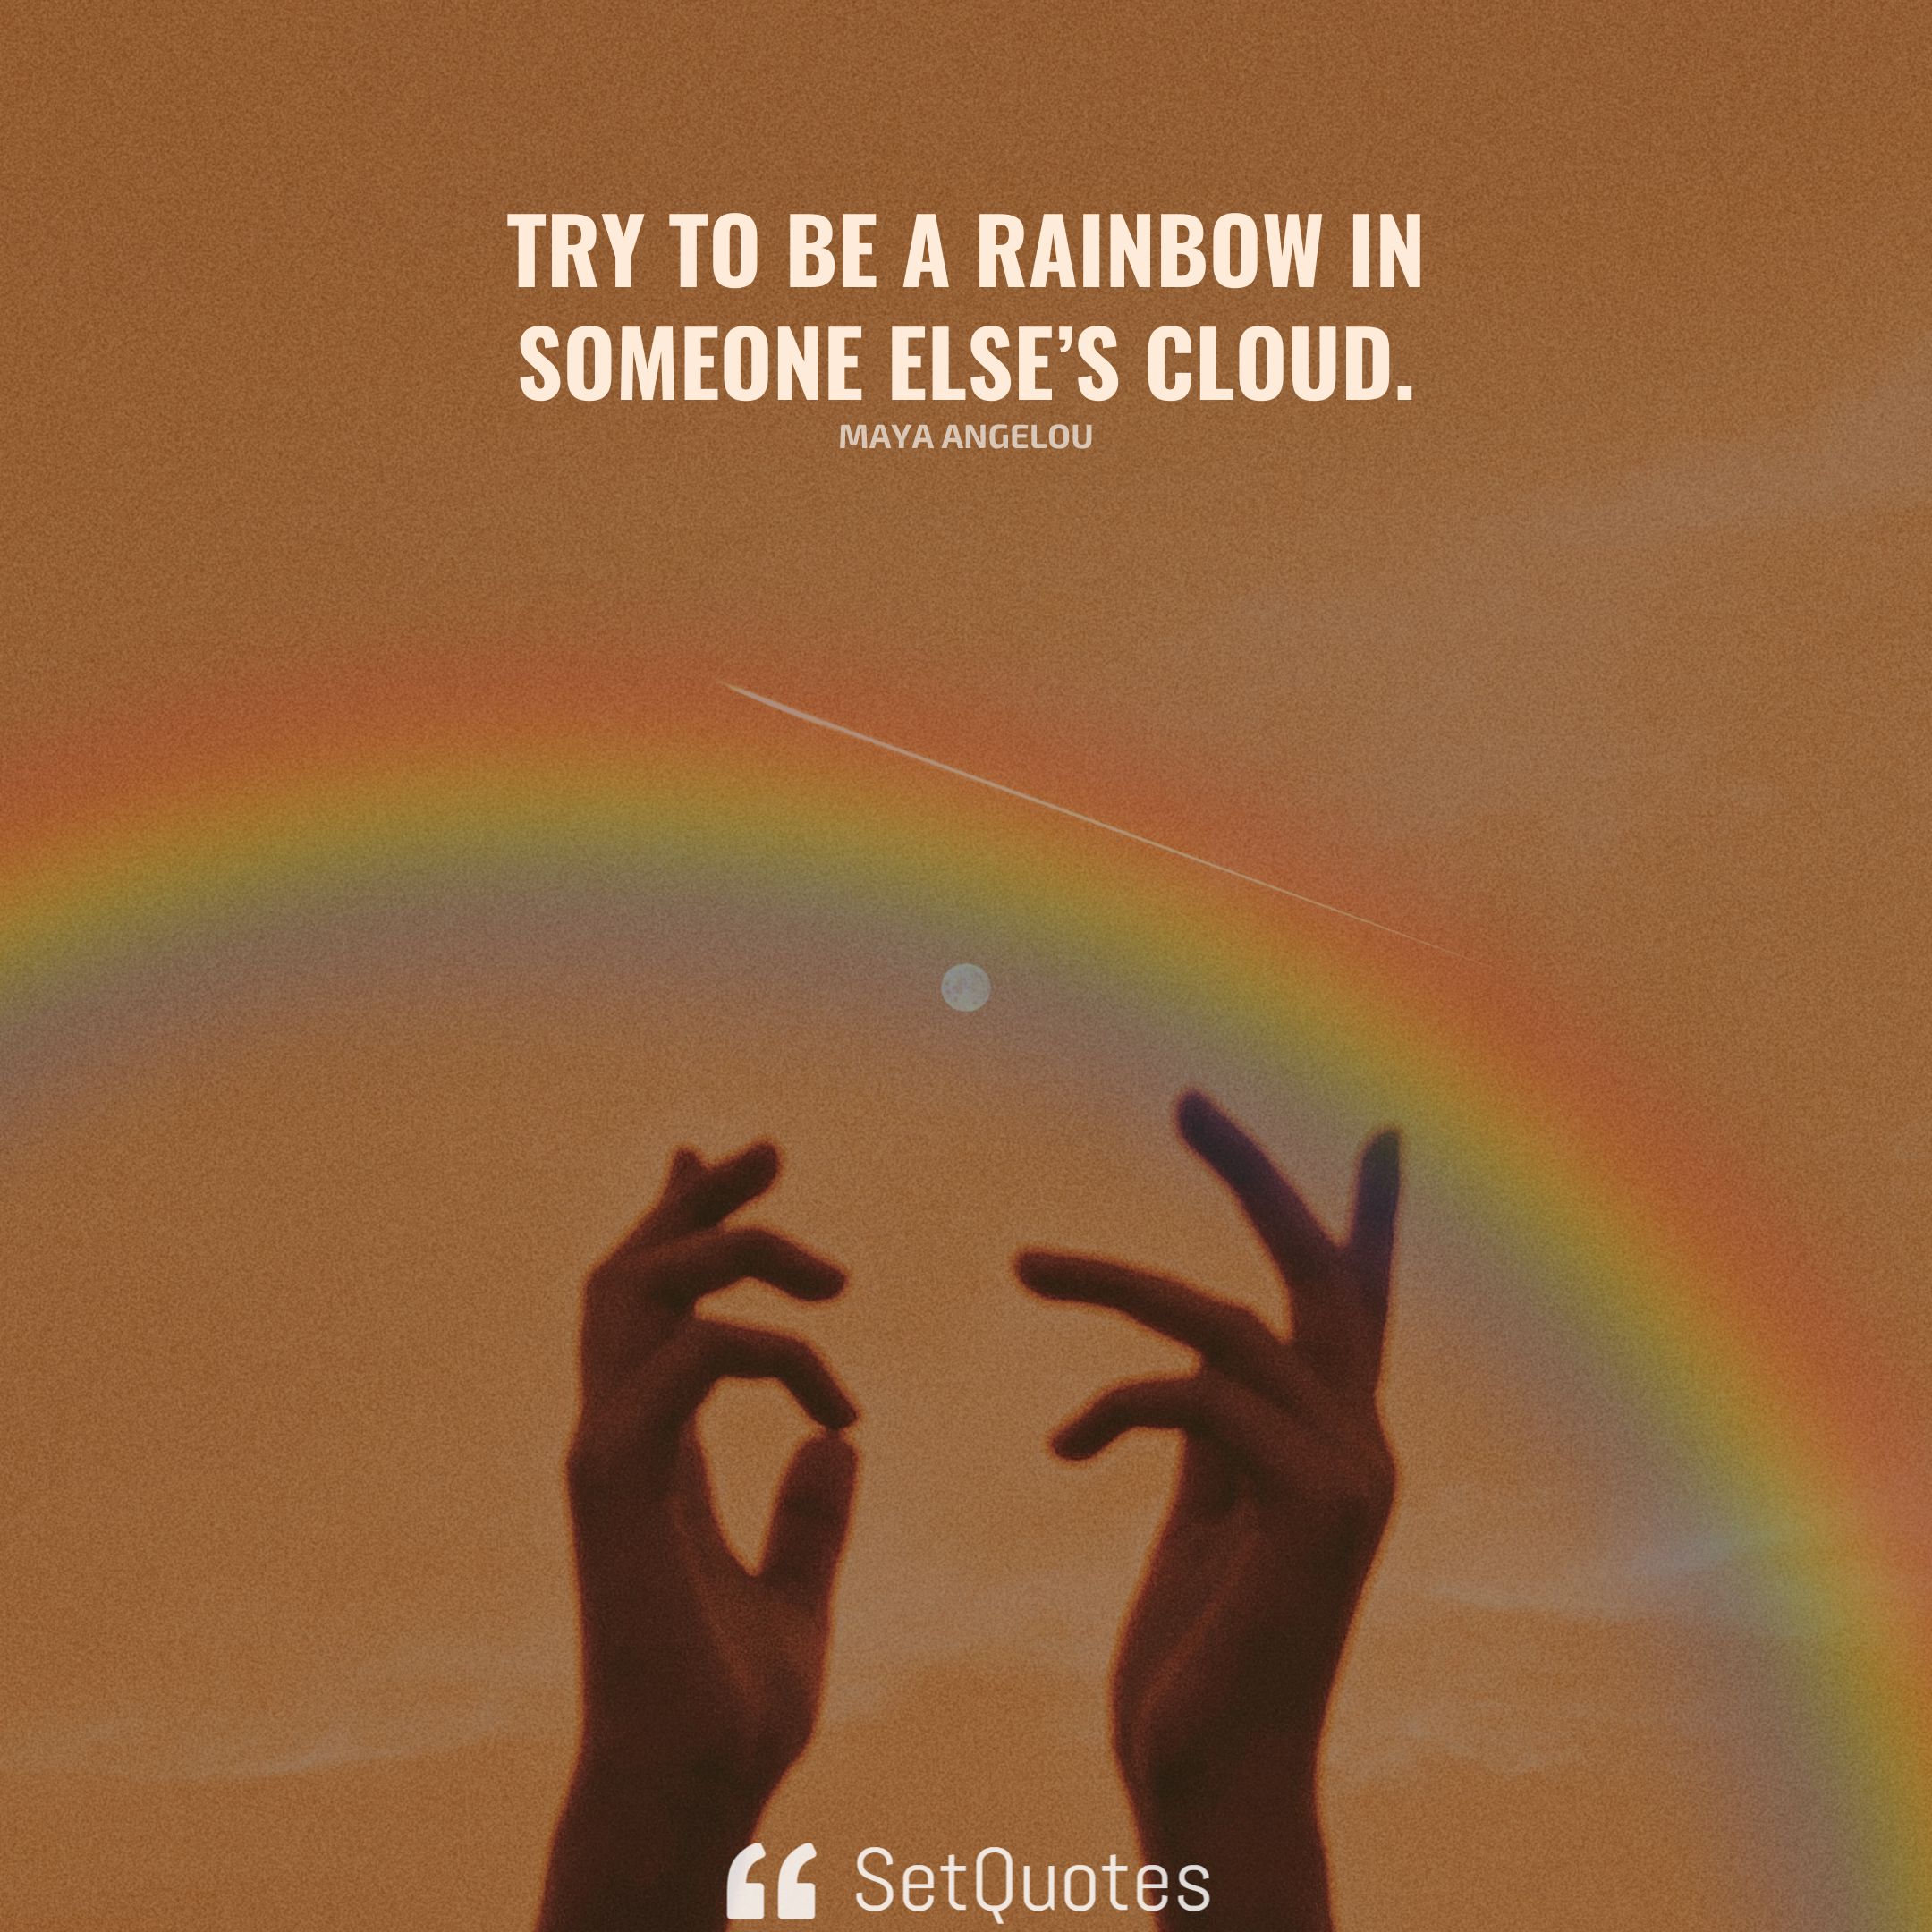 Try to be a rainbow in someone else’s cloud.